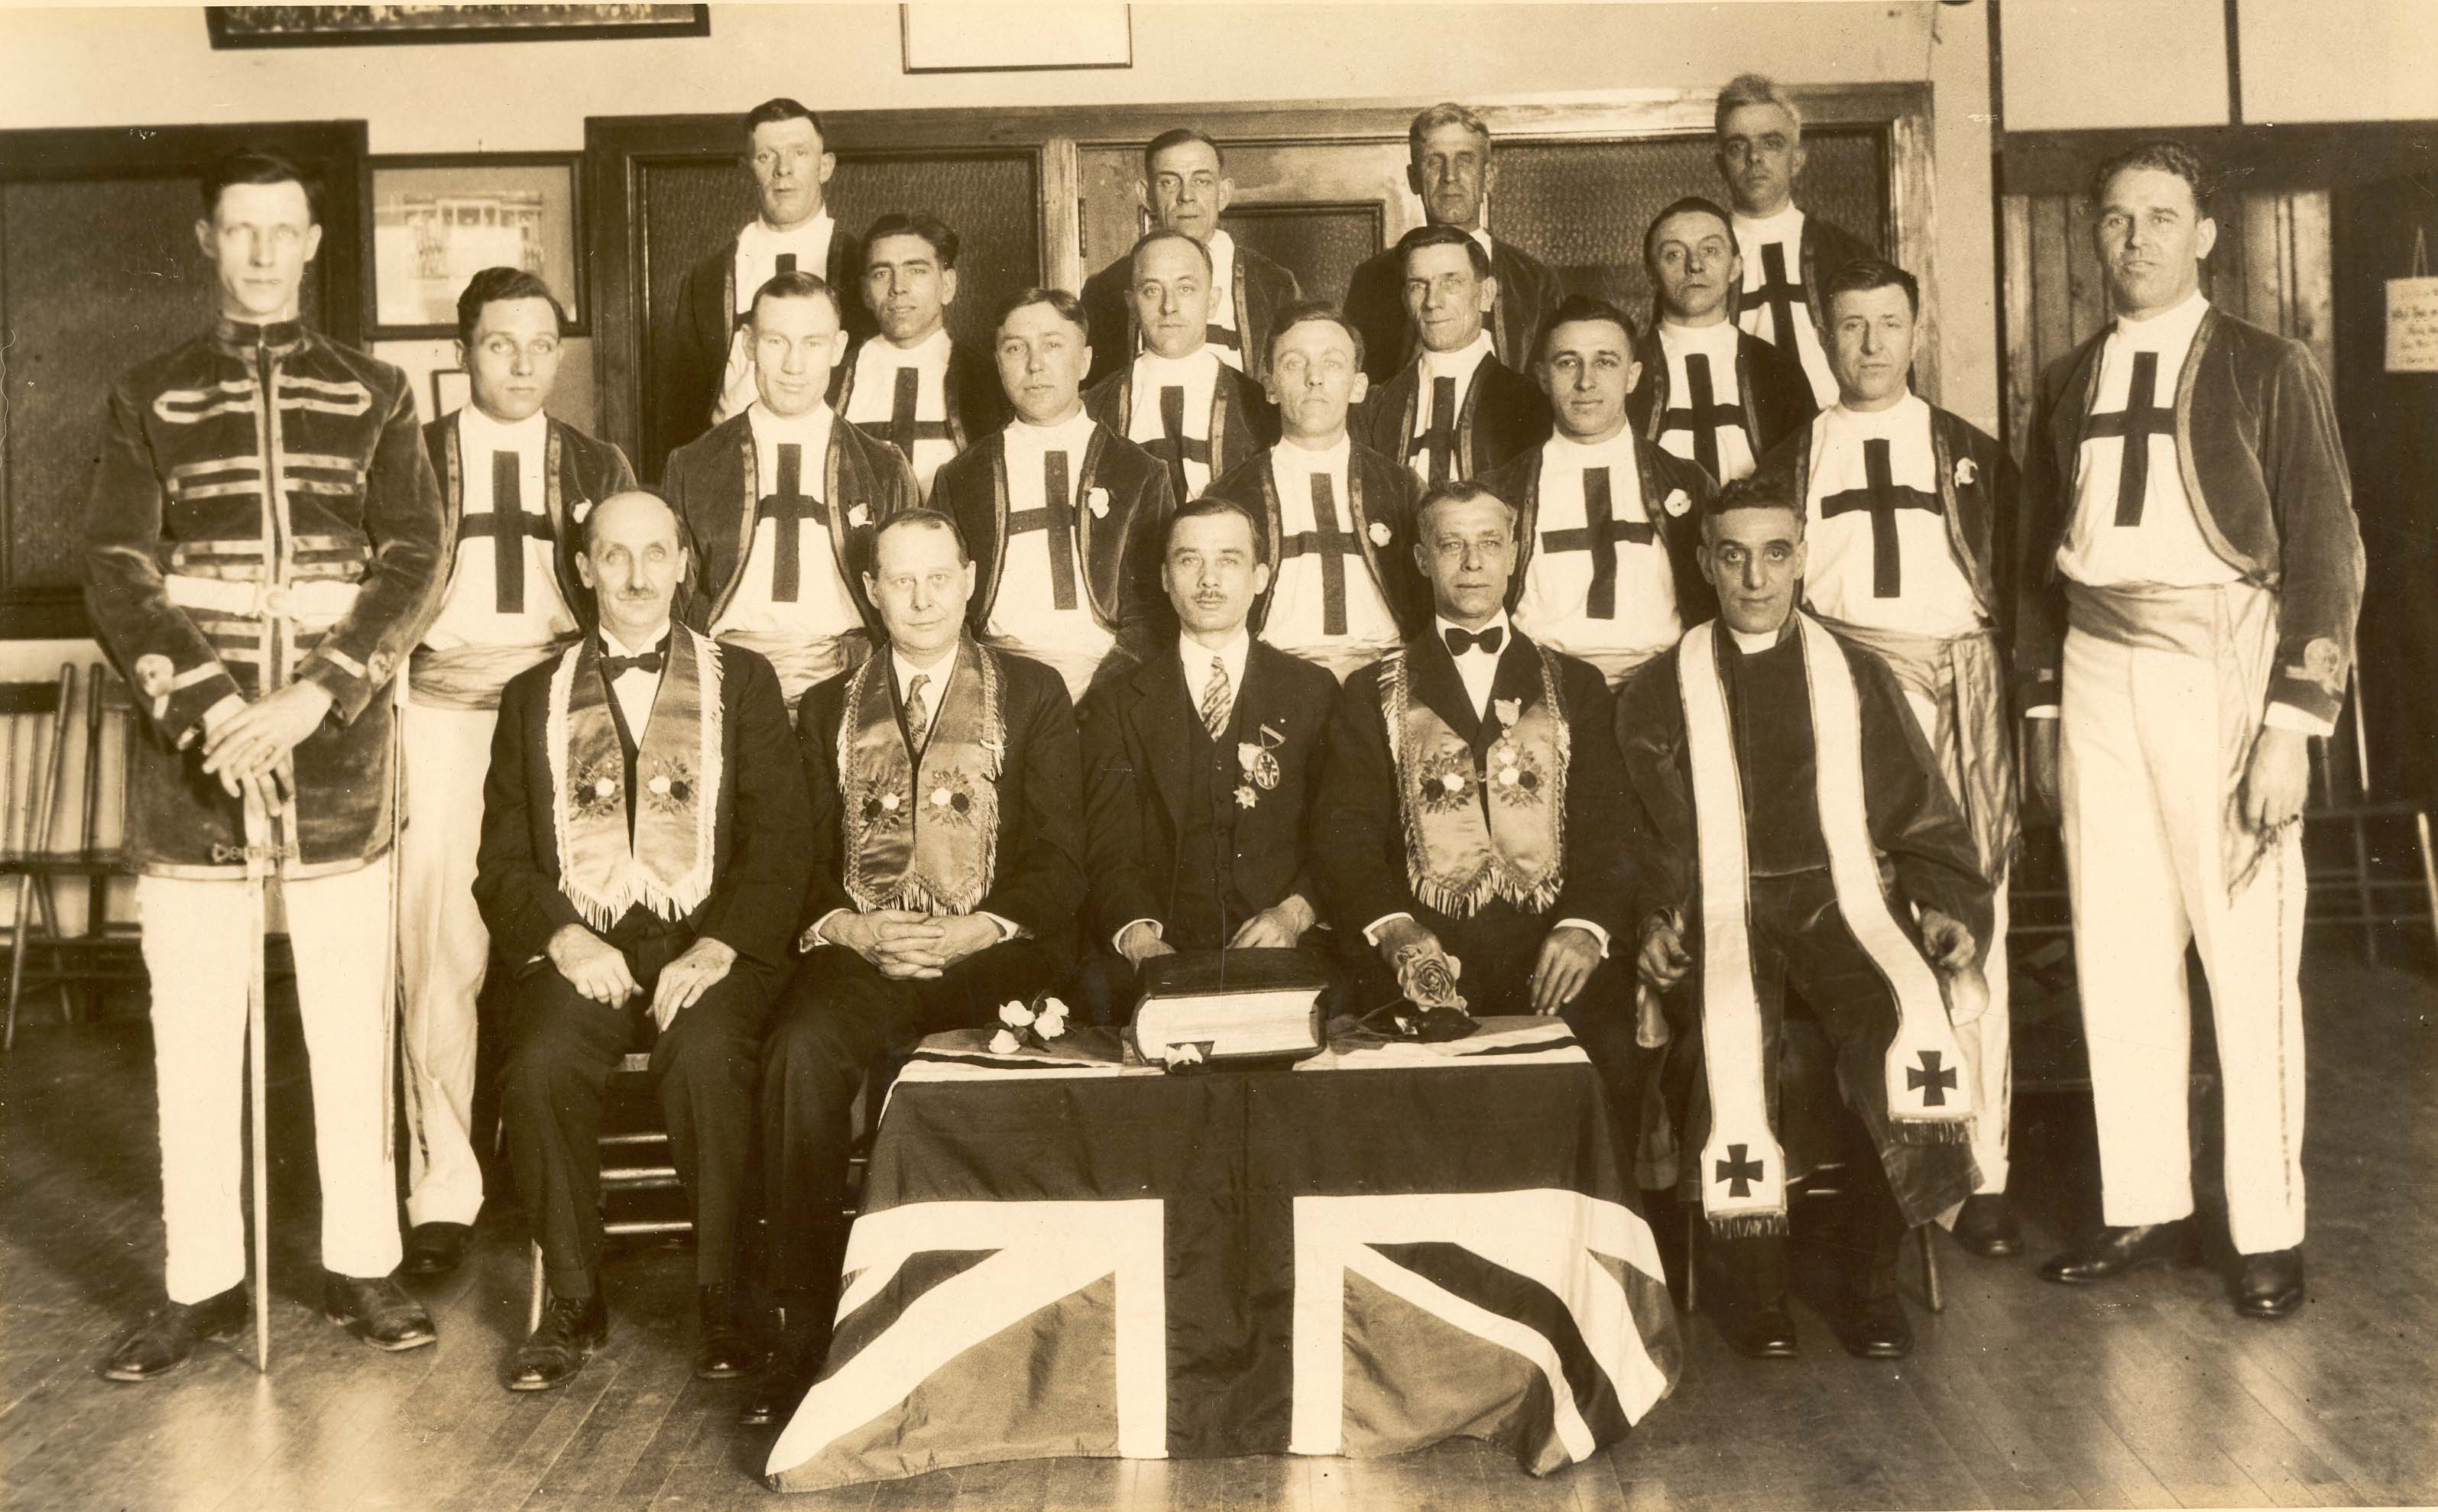 Group%20photo%20of%20the%20officers%20of%20the%20Masonic%20influenced%20Sons%20of%20England%20Order%2C%20all%20of%20whom%20hold%20the%20White%20Rose%20Degree